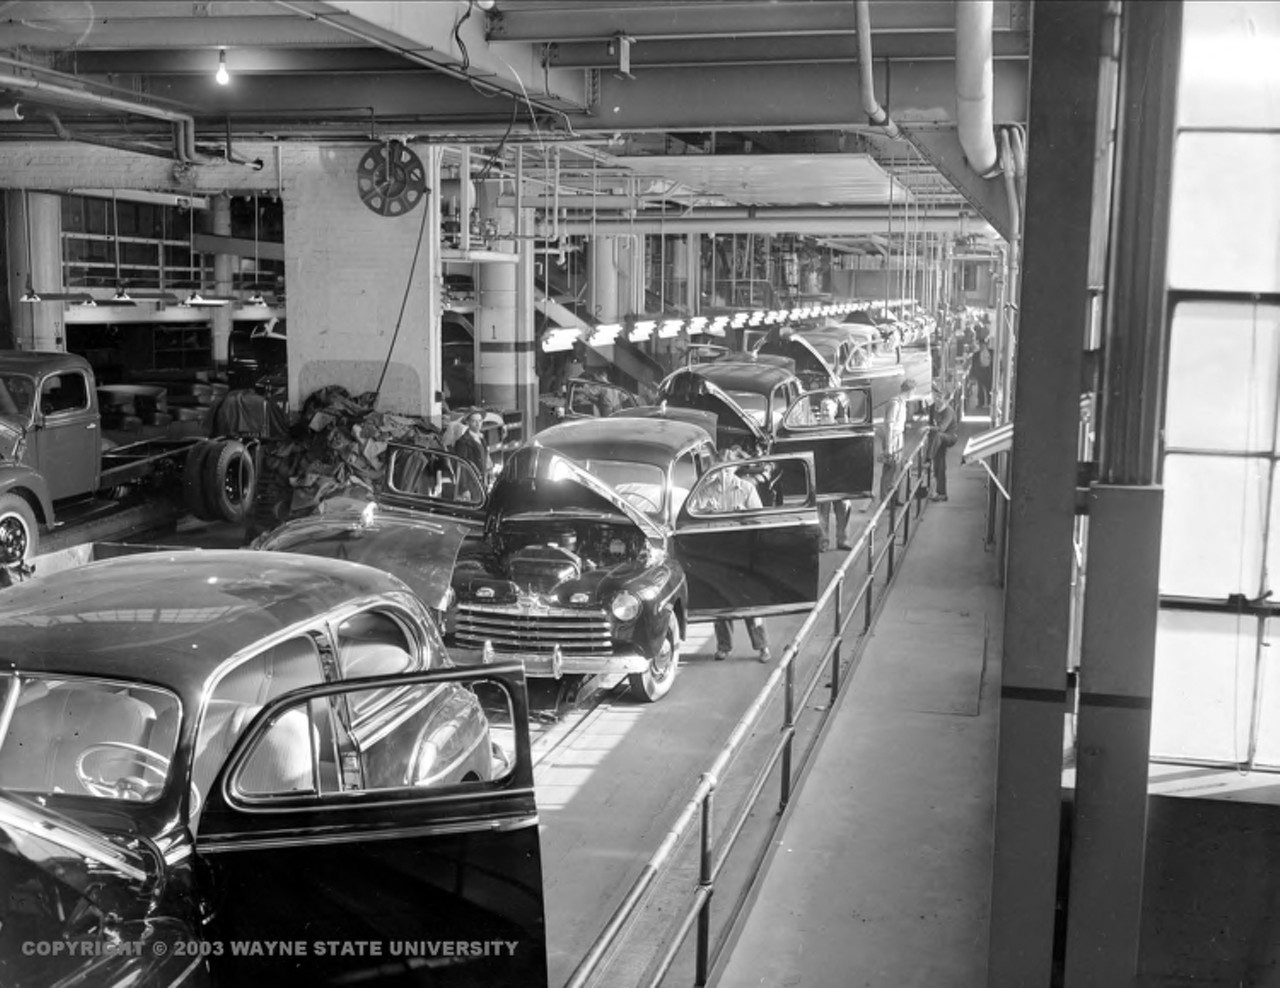 Rouge Plant assembly line
from Virtual Motor City (Photo credit: Detroit News Collection, Walter P. Reuther Library, Wayne State University)